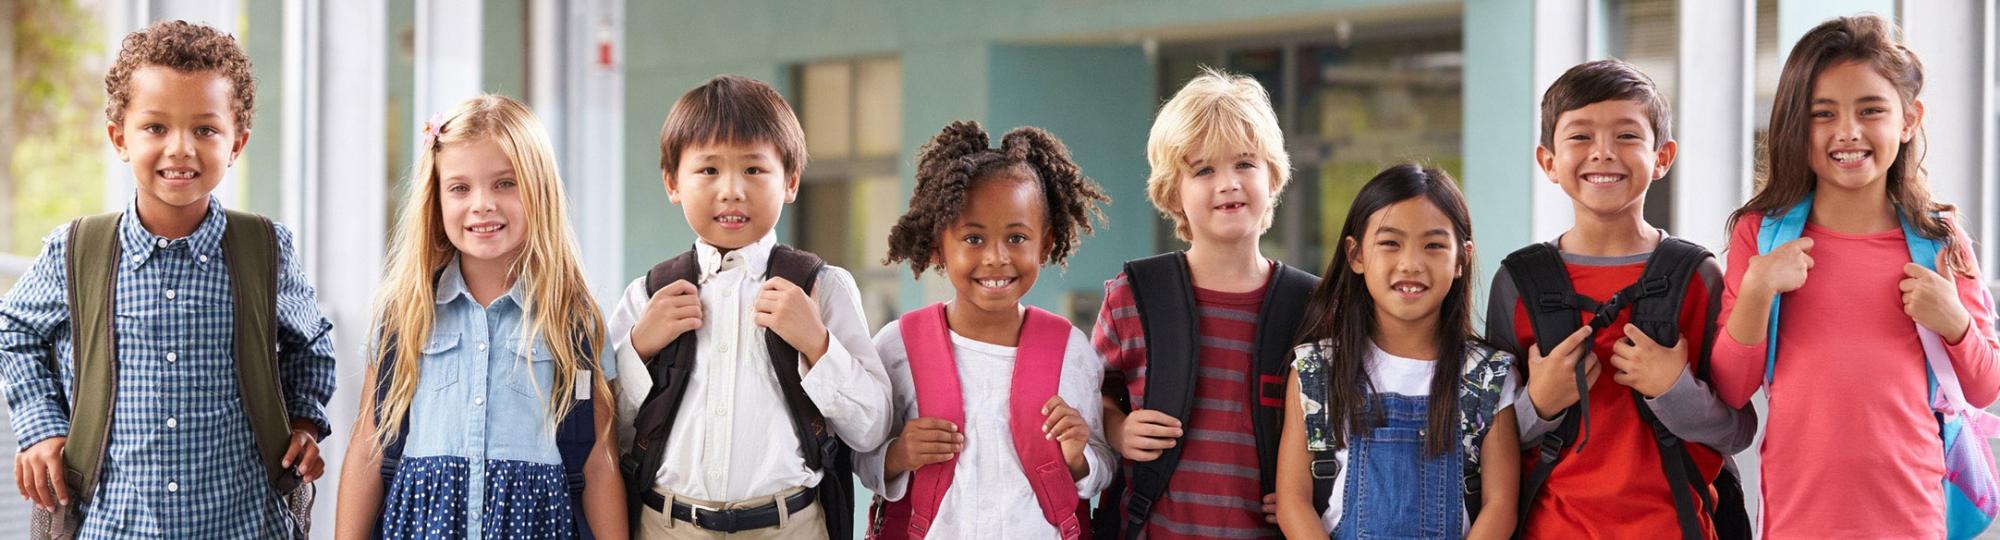 A row of smiling, diverse schoolchildren wearing backpacks